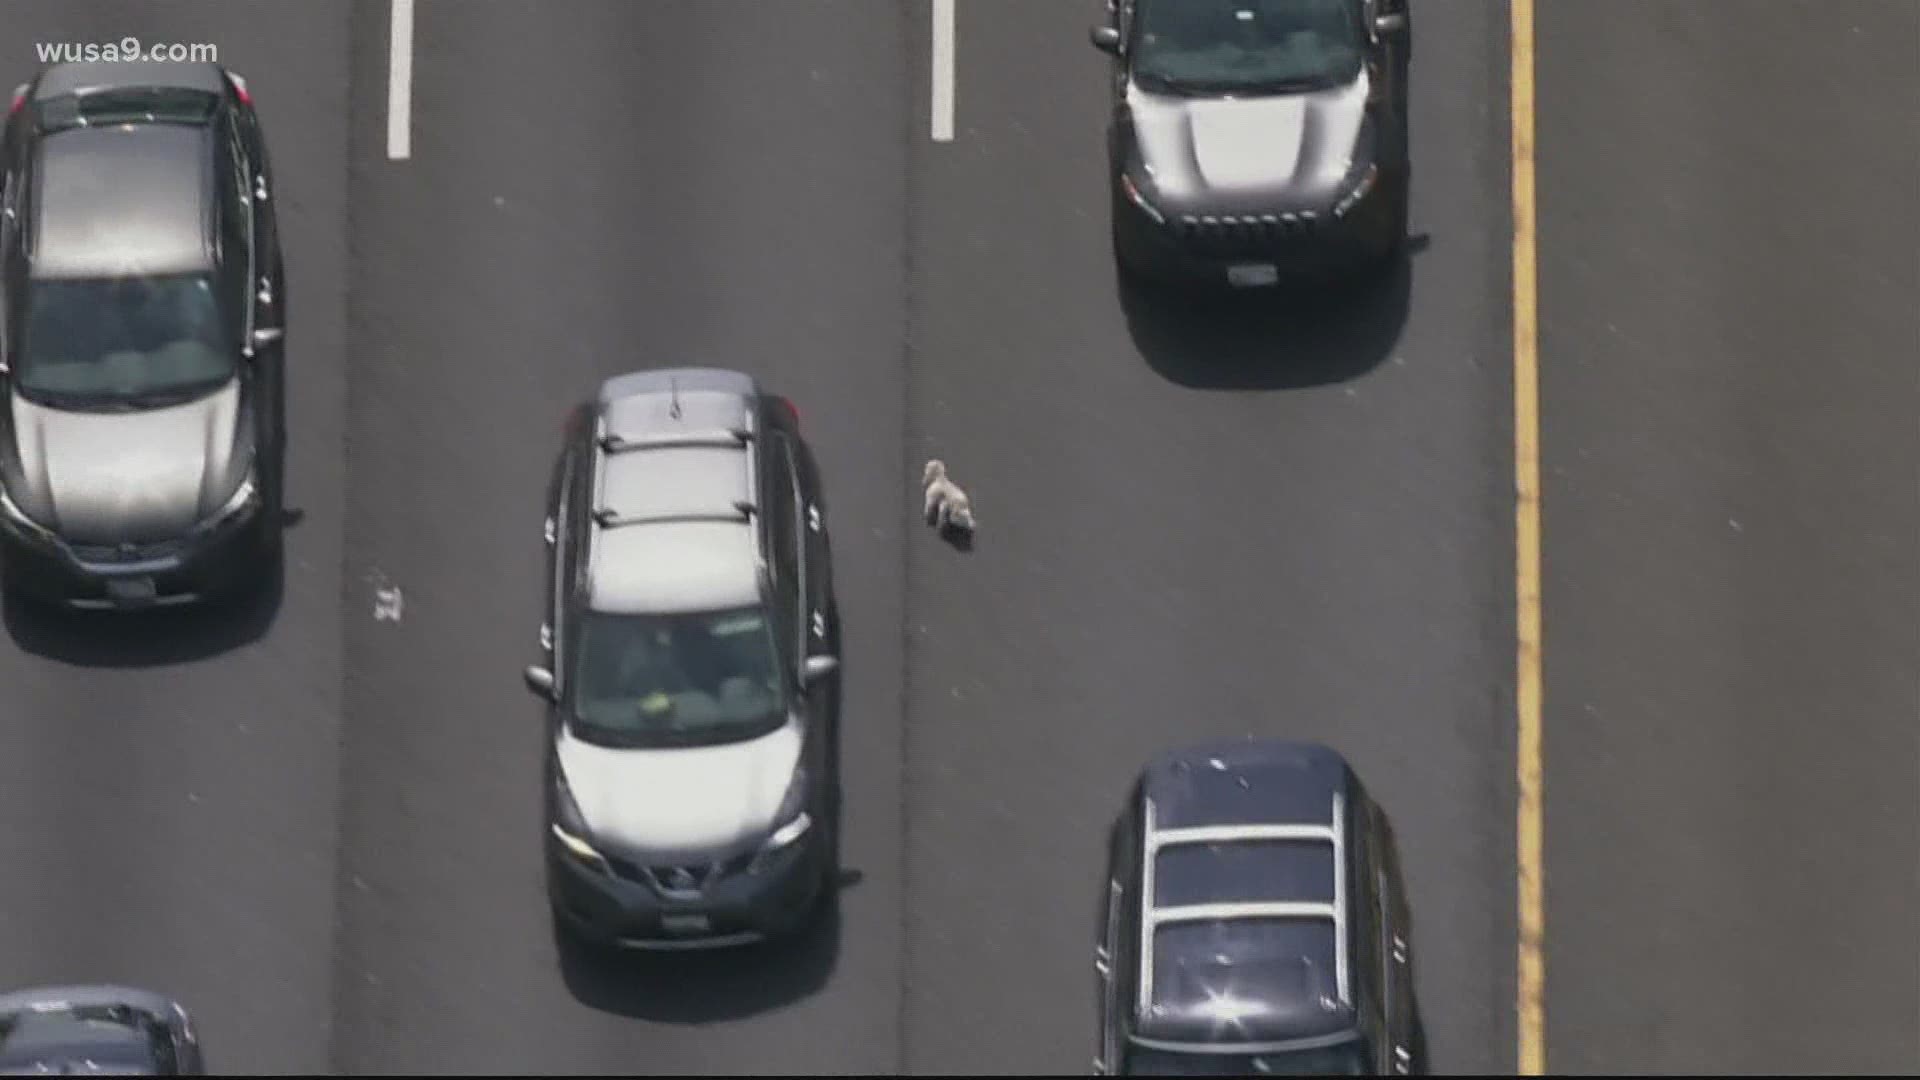 A small, white pup was seen darting down an emergency lane as cars waited in traffic, built up after a crash Friday afternoon.